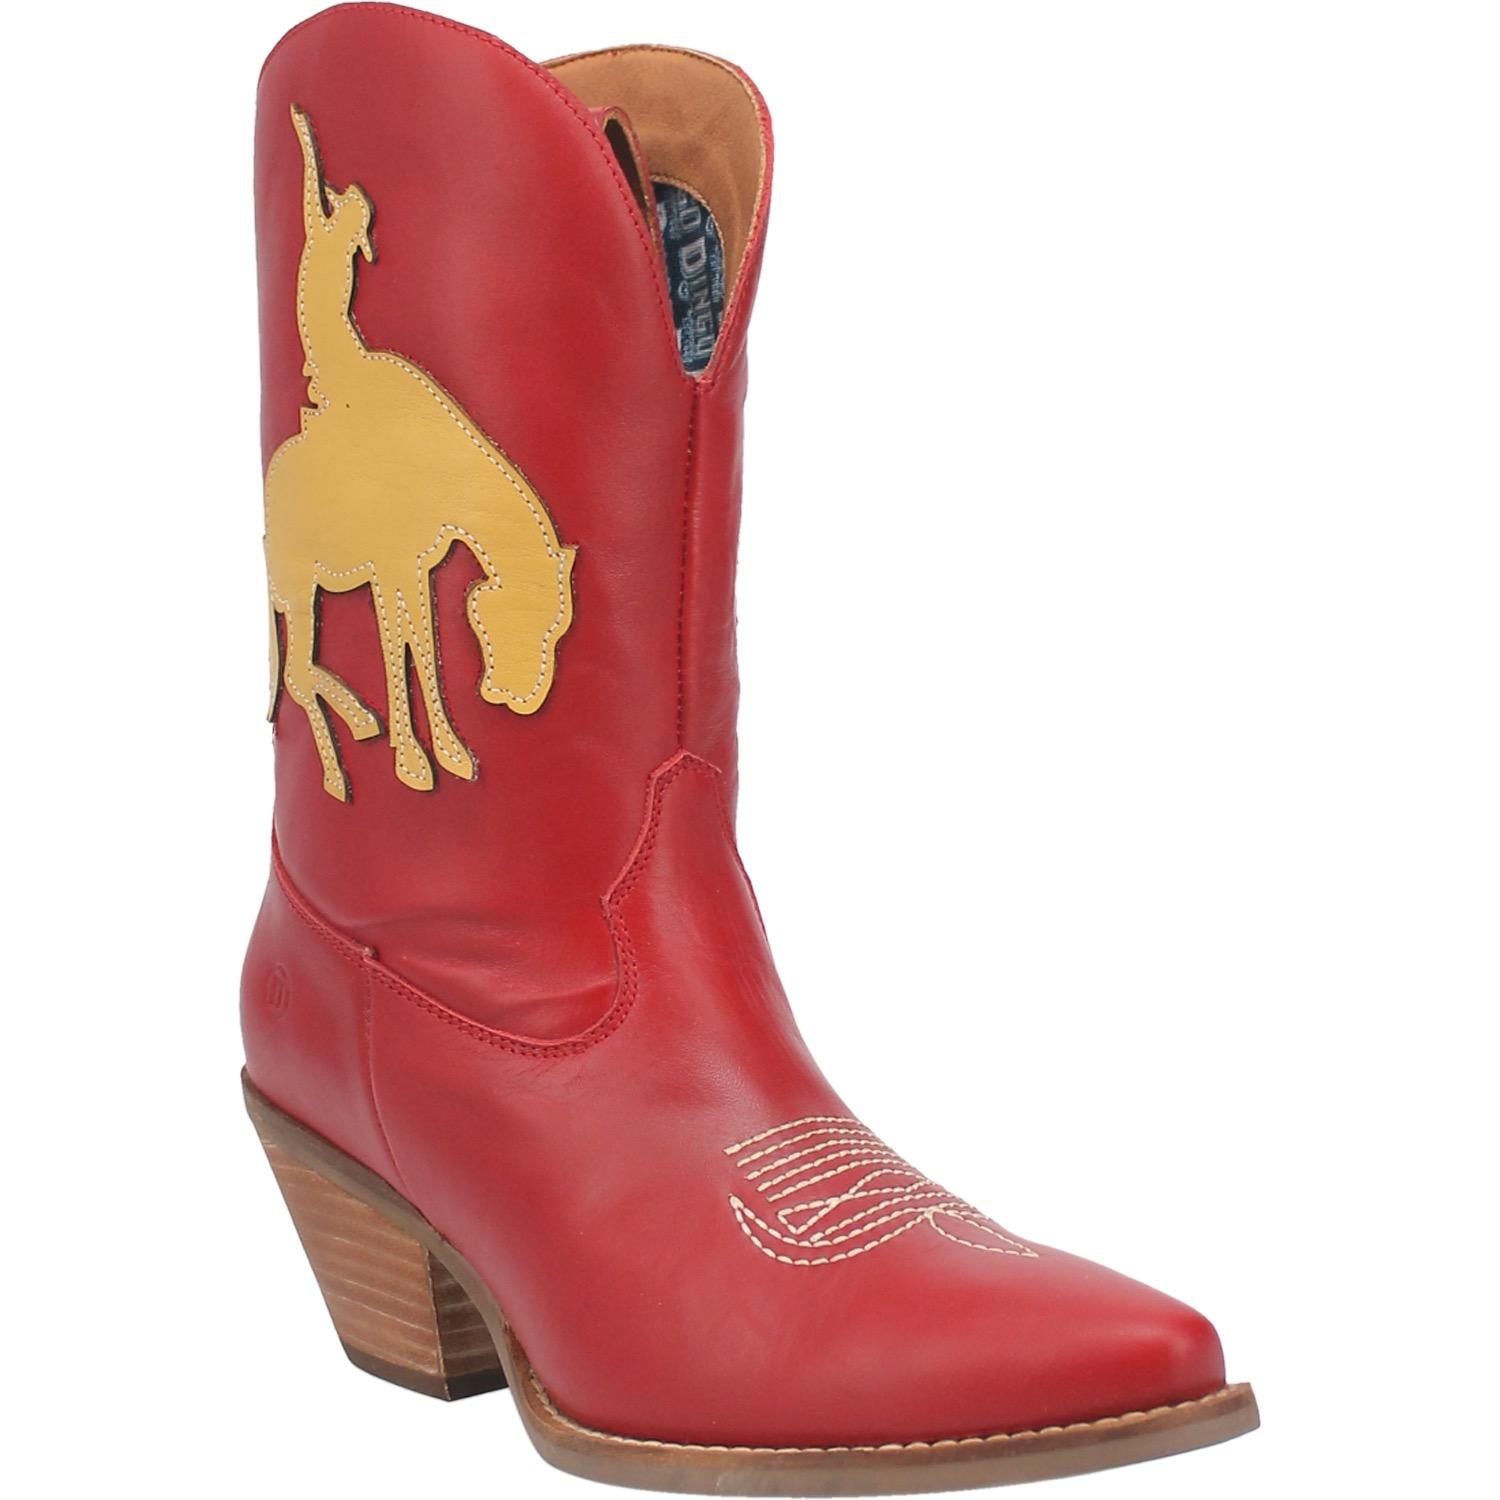 The boots shown are a mid calf height with a rounded pointed toe. They are genuine leather. They are red with a yellow leather piece sewn on each side of a bronc rider.